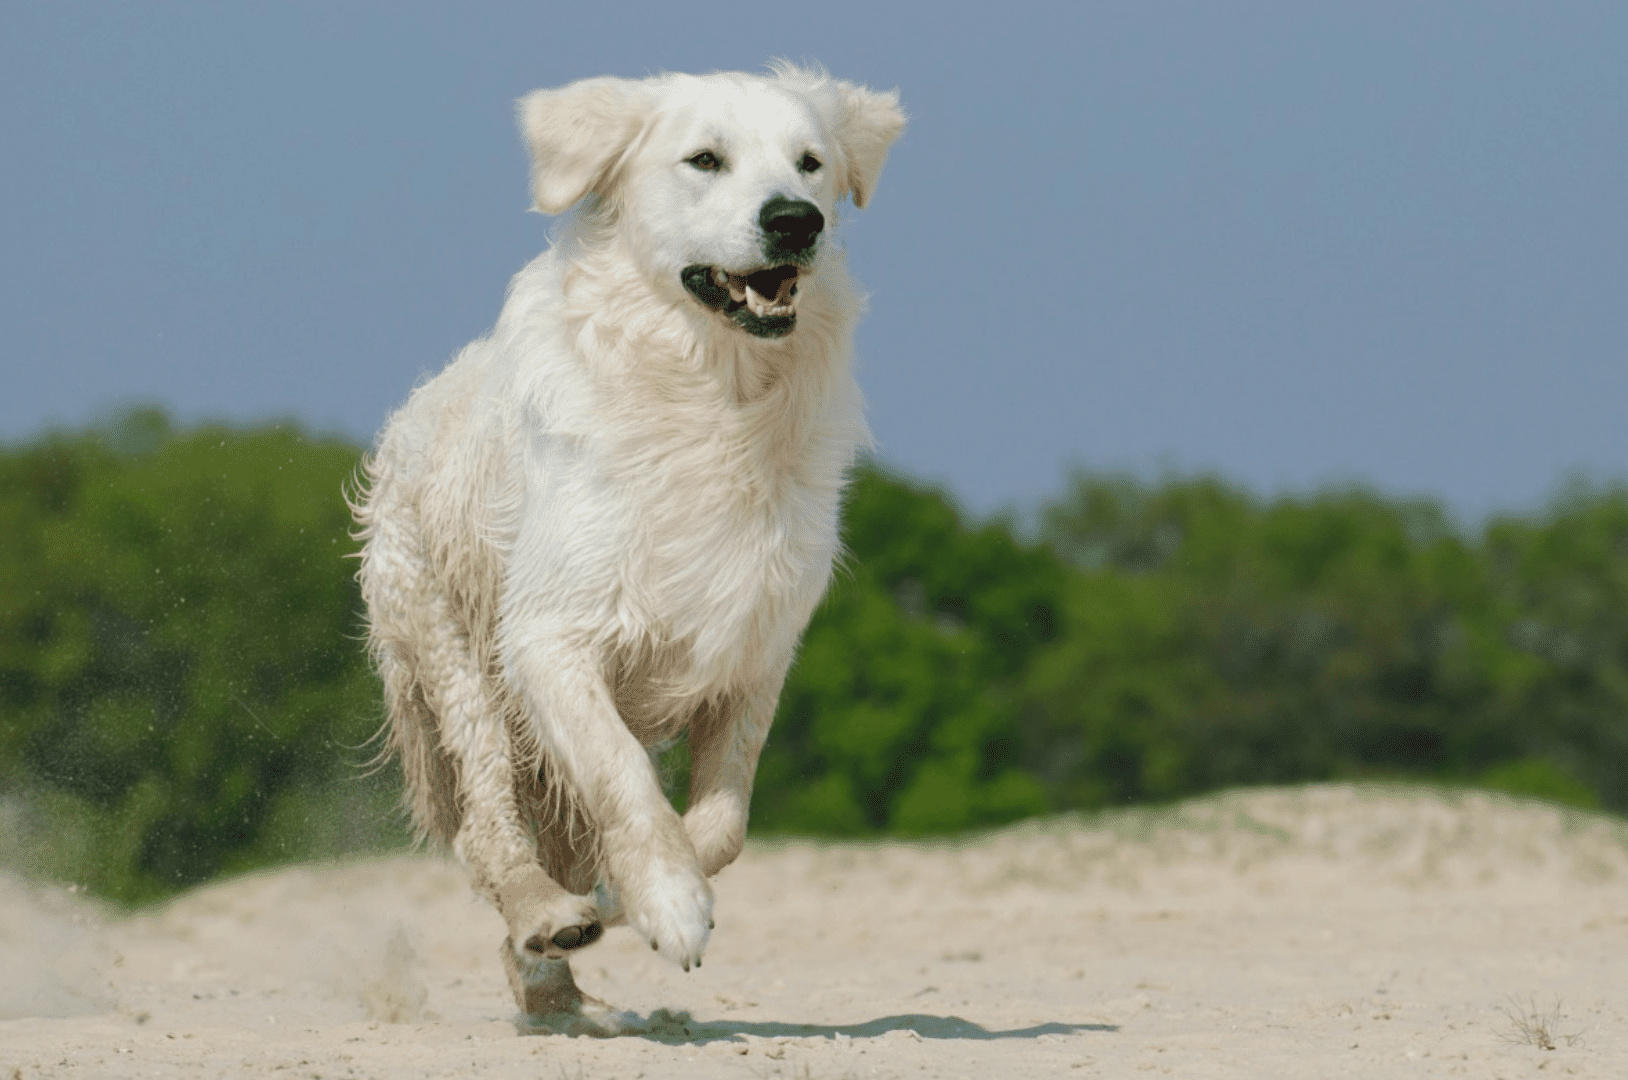 A Great Pyrenees running on a beach.